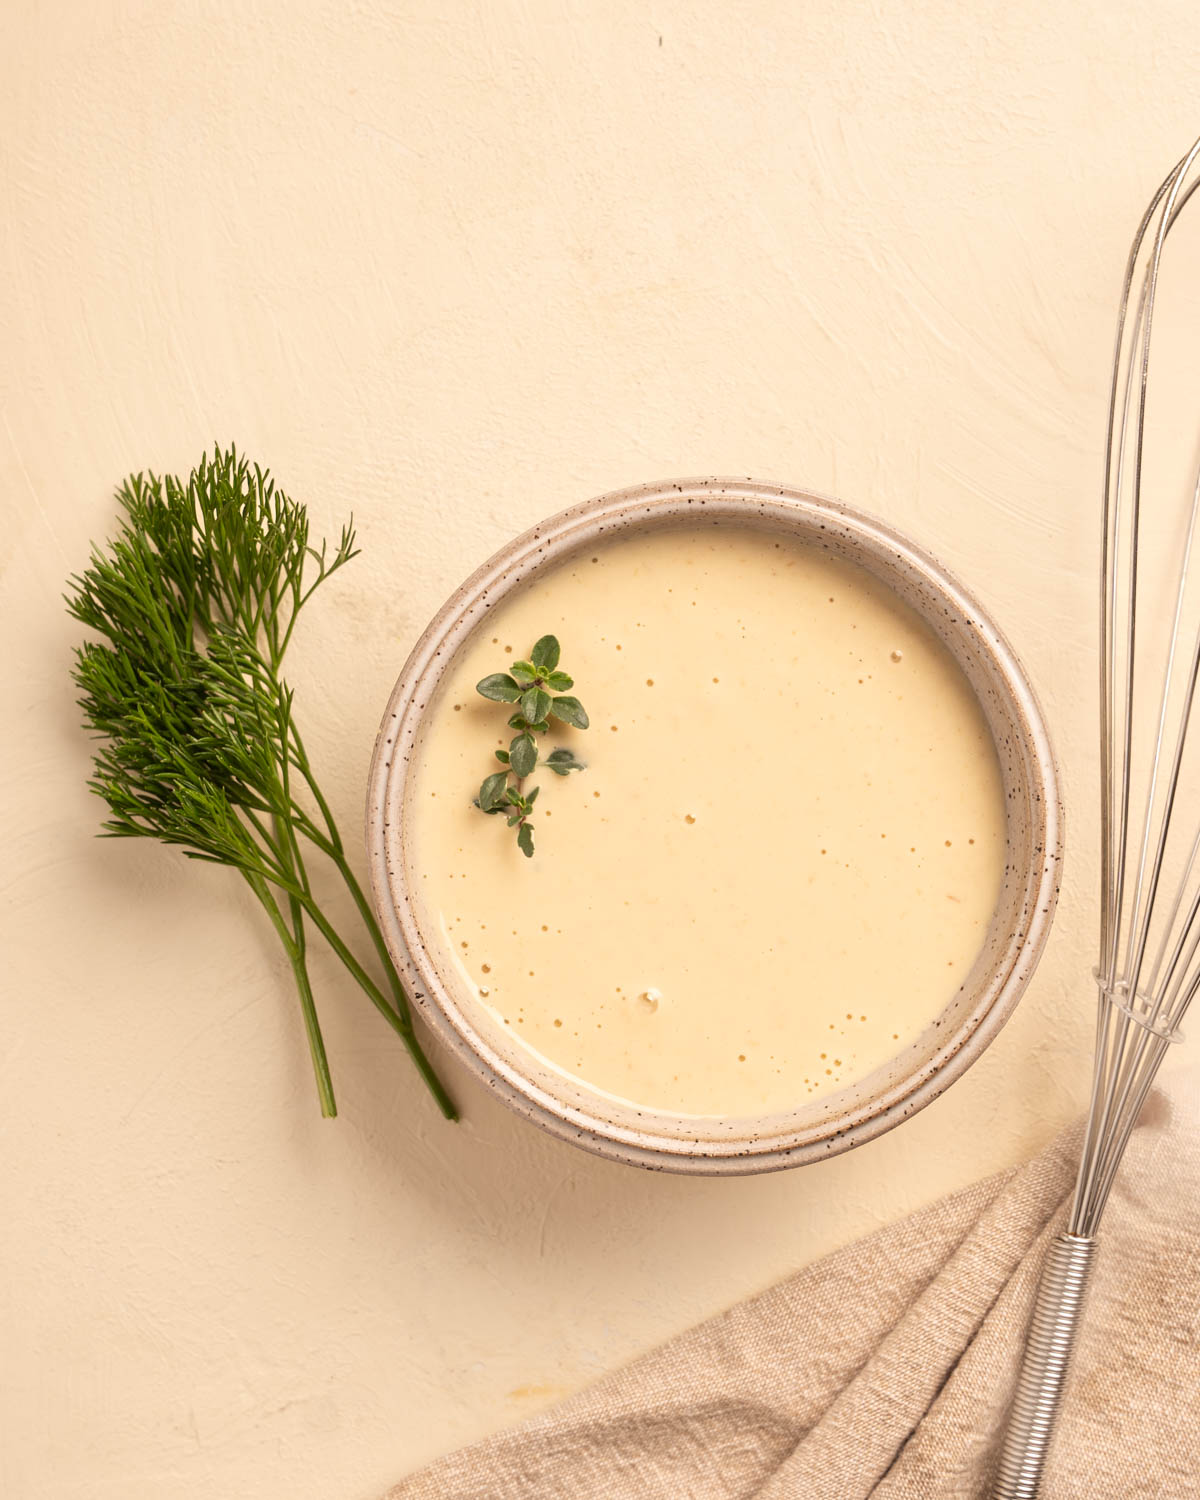 A stoneware bowl with a cream Horseradish Aioli along side some bright herbs and a whisk.